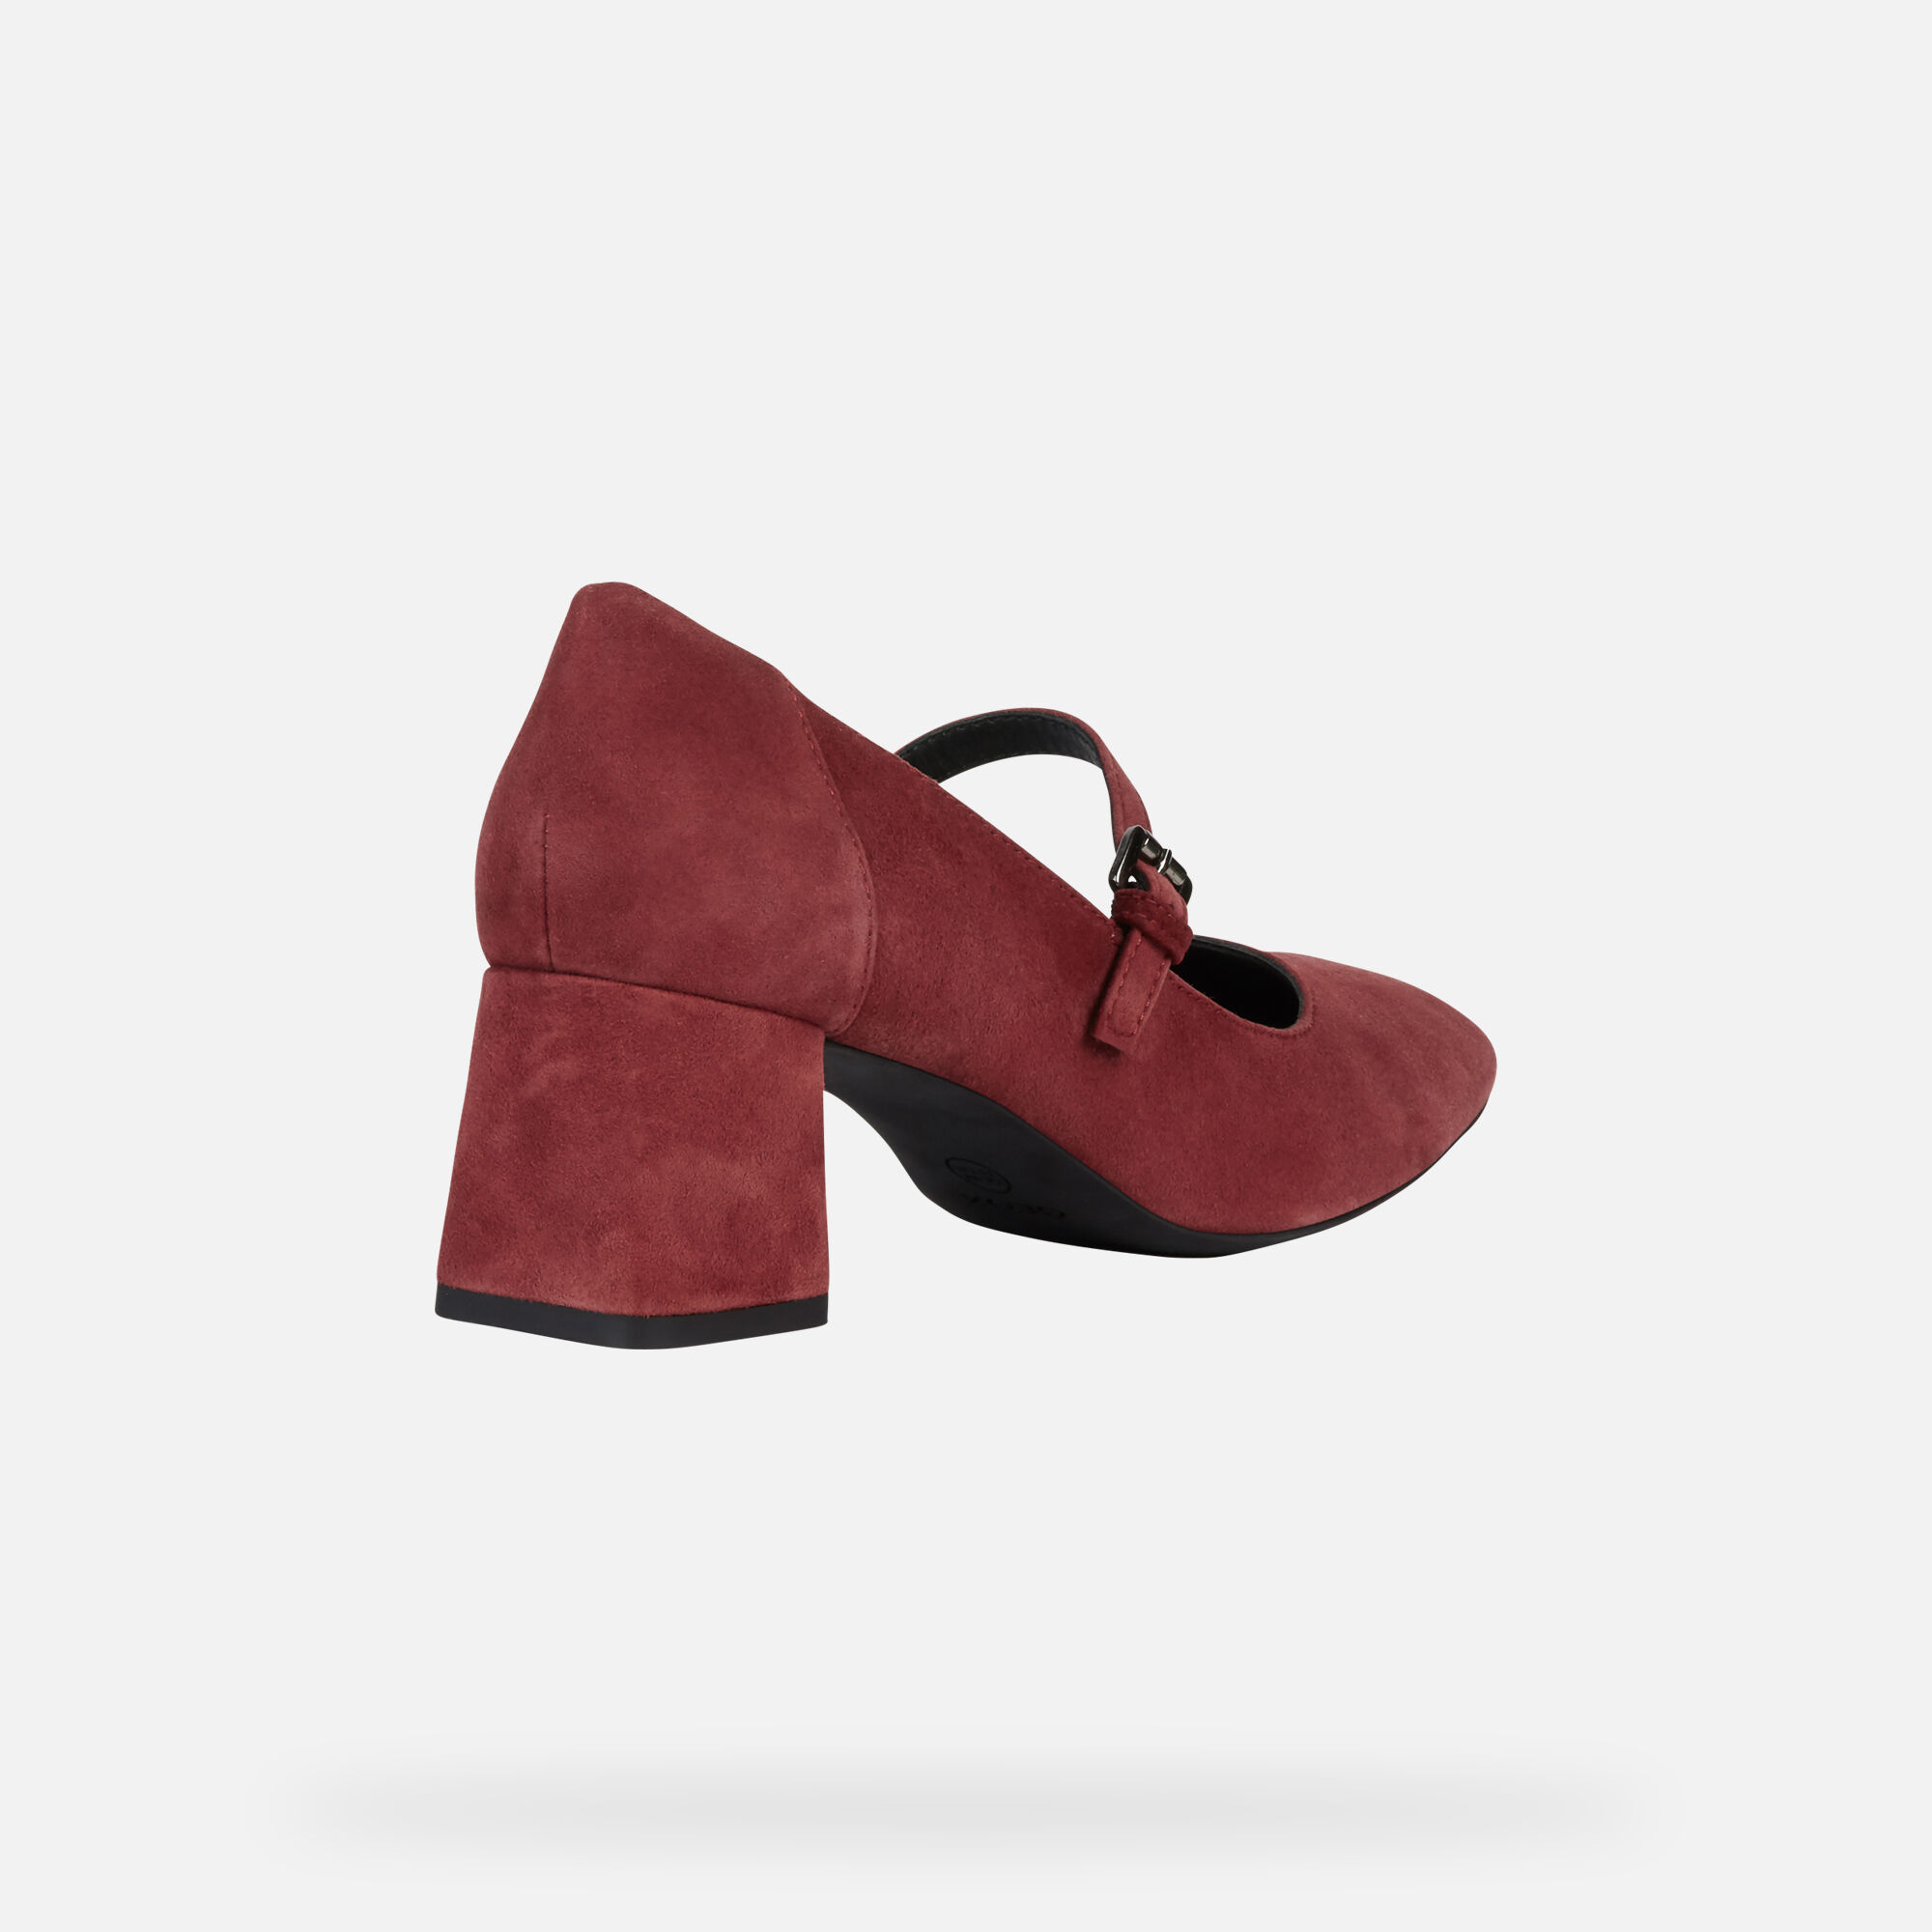 geox seyla ankle boots